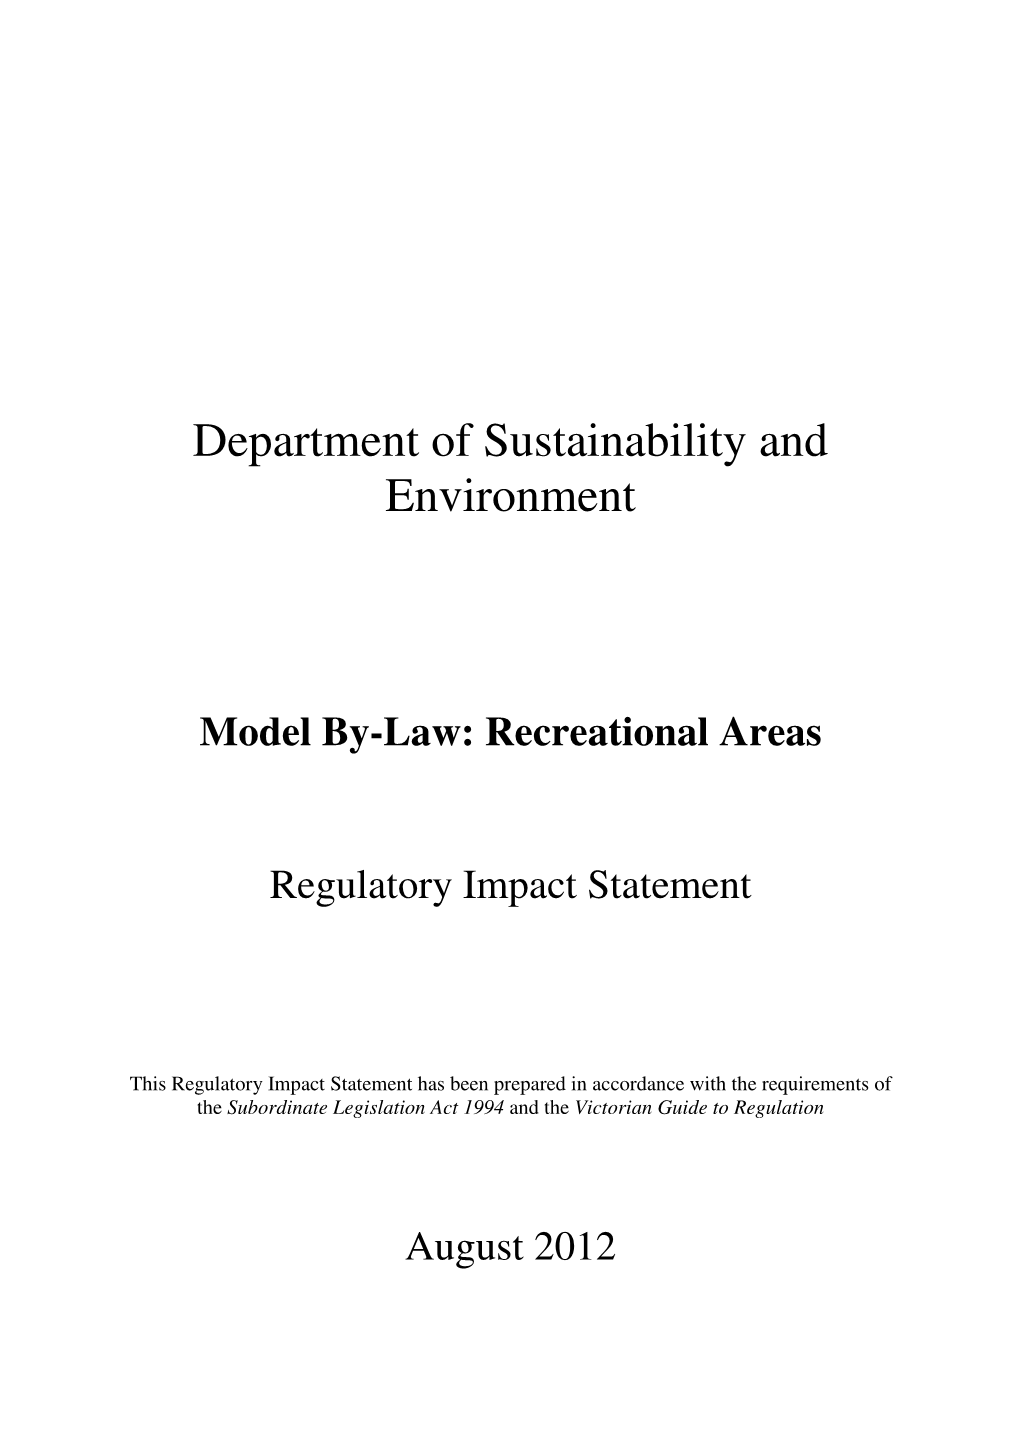 Model By-Law: Recreational Areas Regulatory Impact Statement